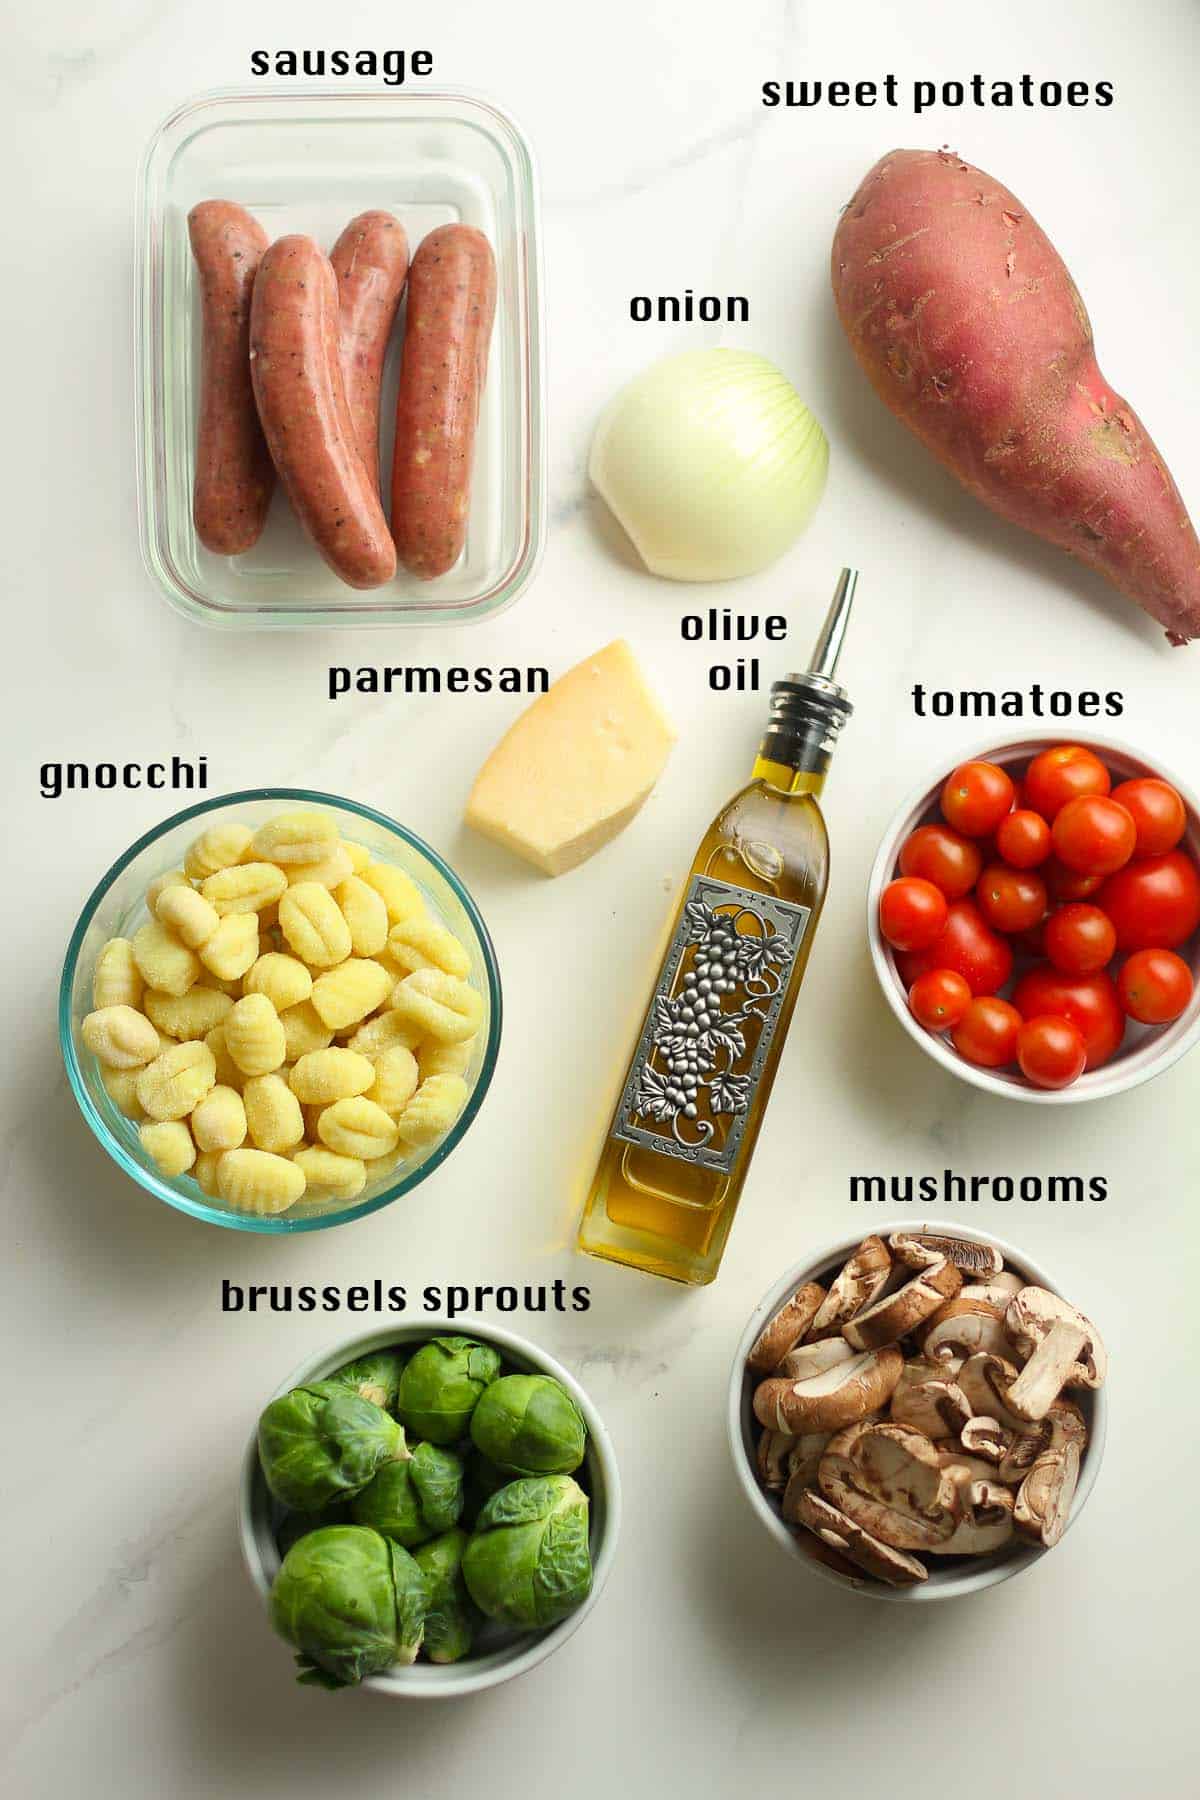 The ingredients, labeled, for the gnocchi and vegetable bake, including sausage, onion, mushrooms, etc.